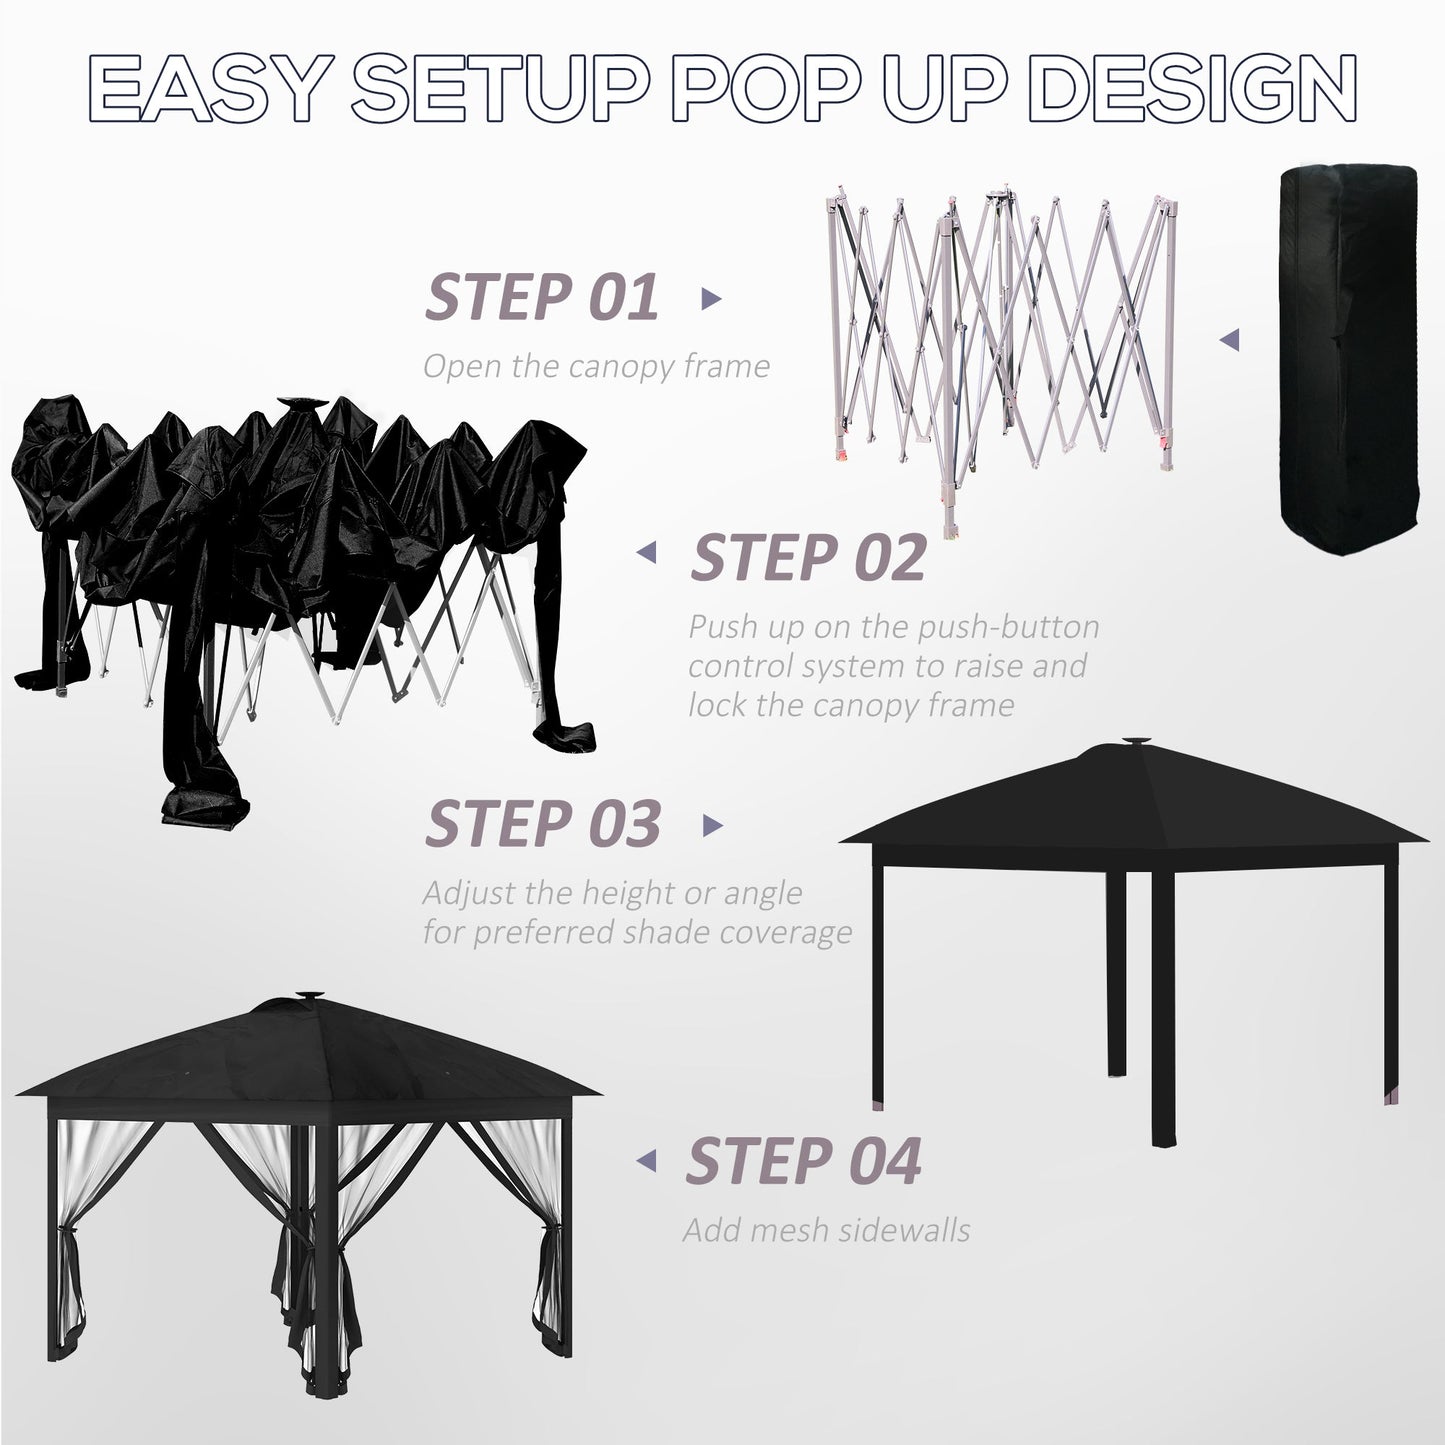 -Outsunny 11' x 11' Pop Up Canopy, Foldable Canopy Tent w/ Solar LED Light System, Remote Control & Adjustable Height for Backyard Garden Patio, Black - Outdoor Style Company